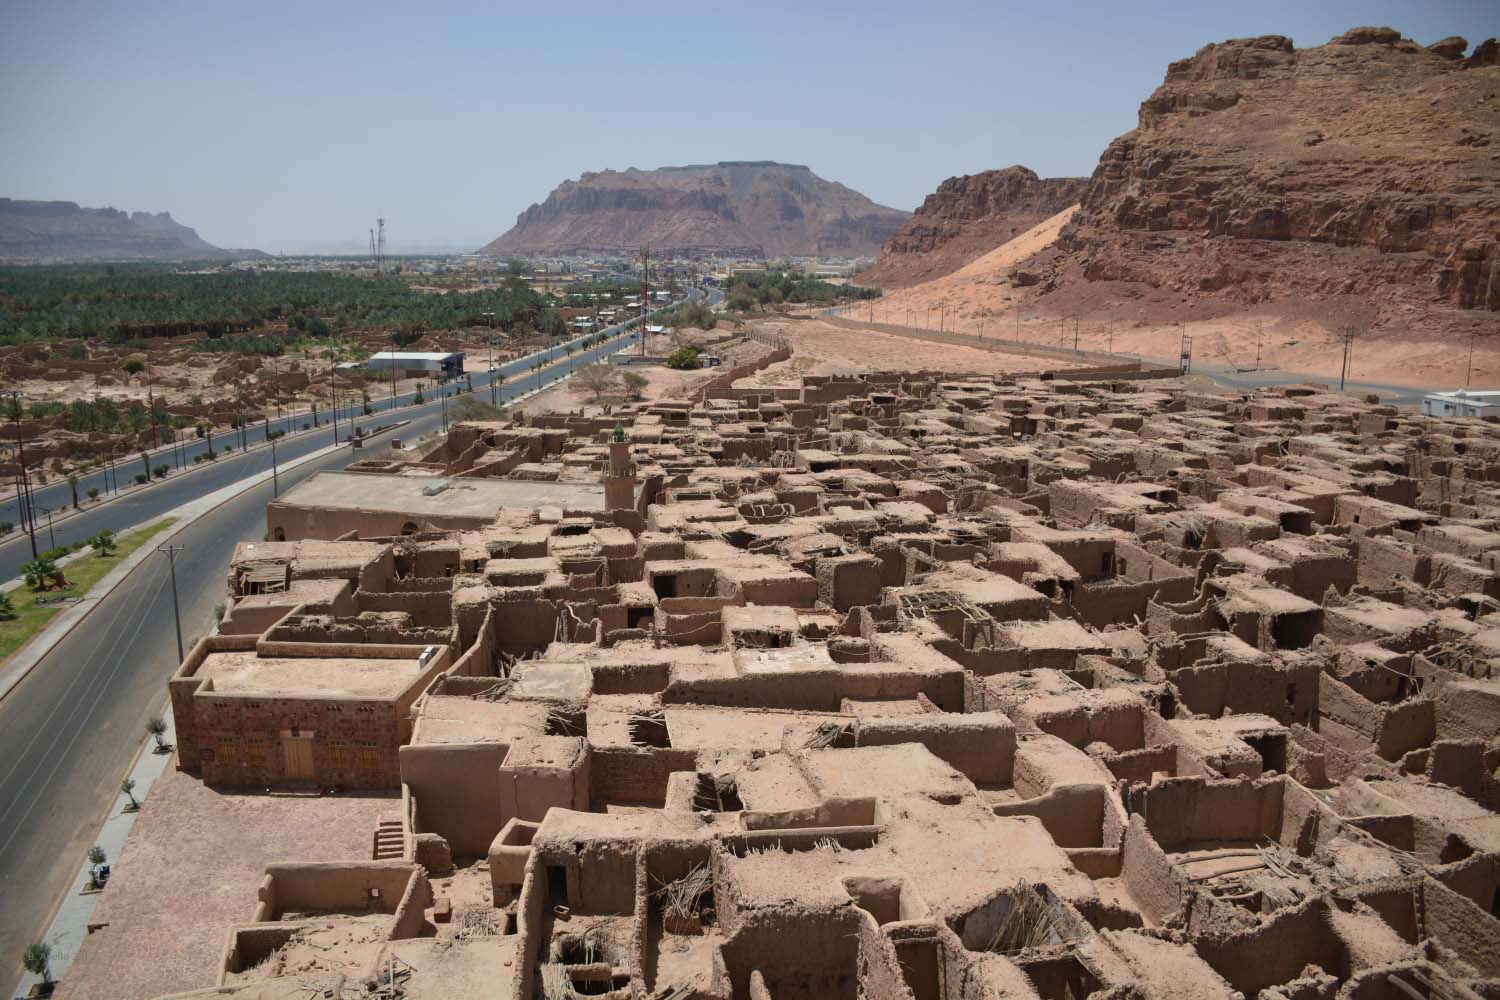 al-Ula - Elevated view of the town along a paved highway